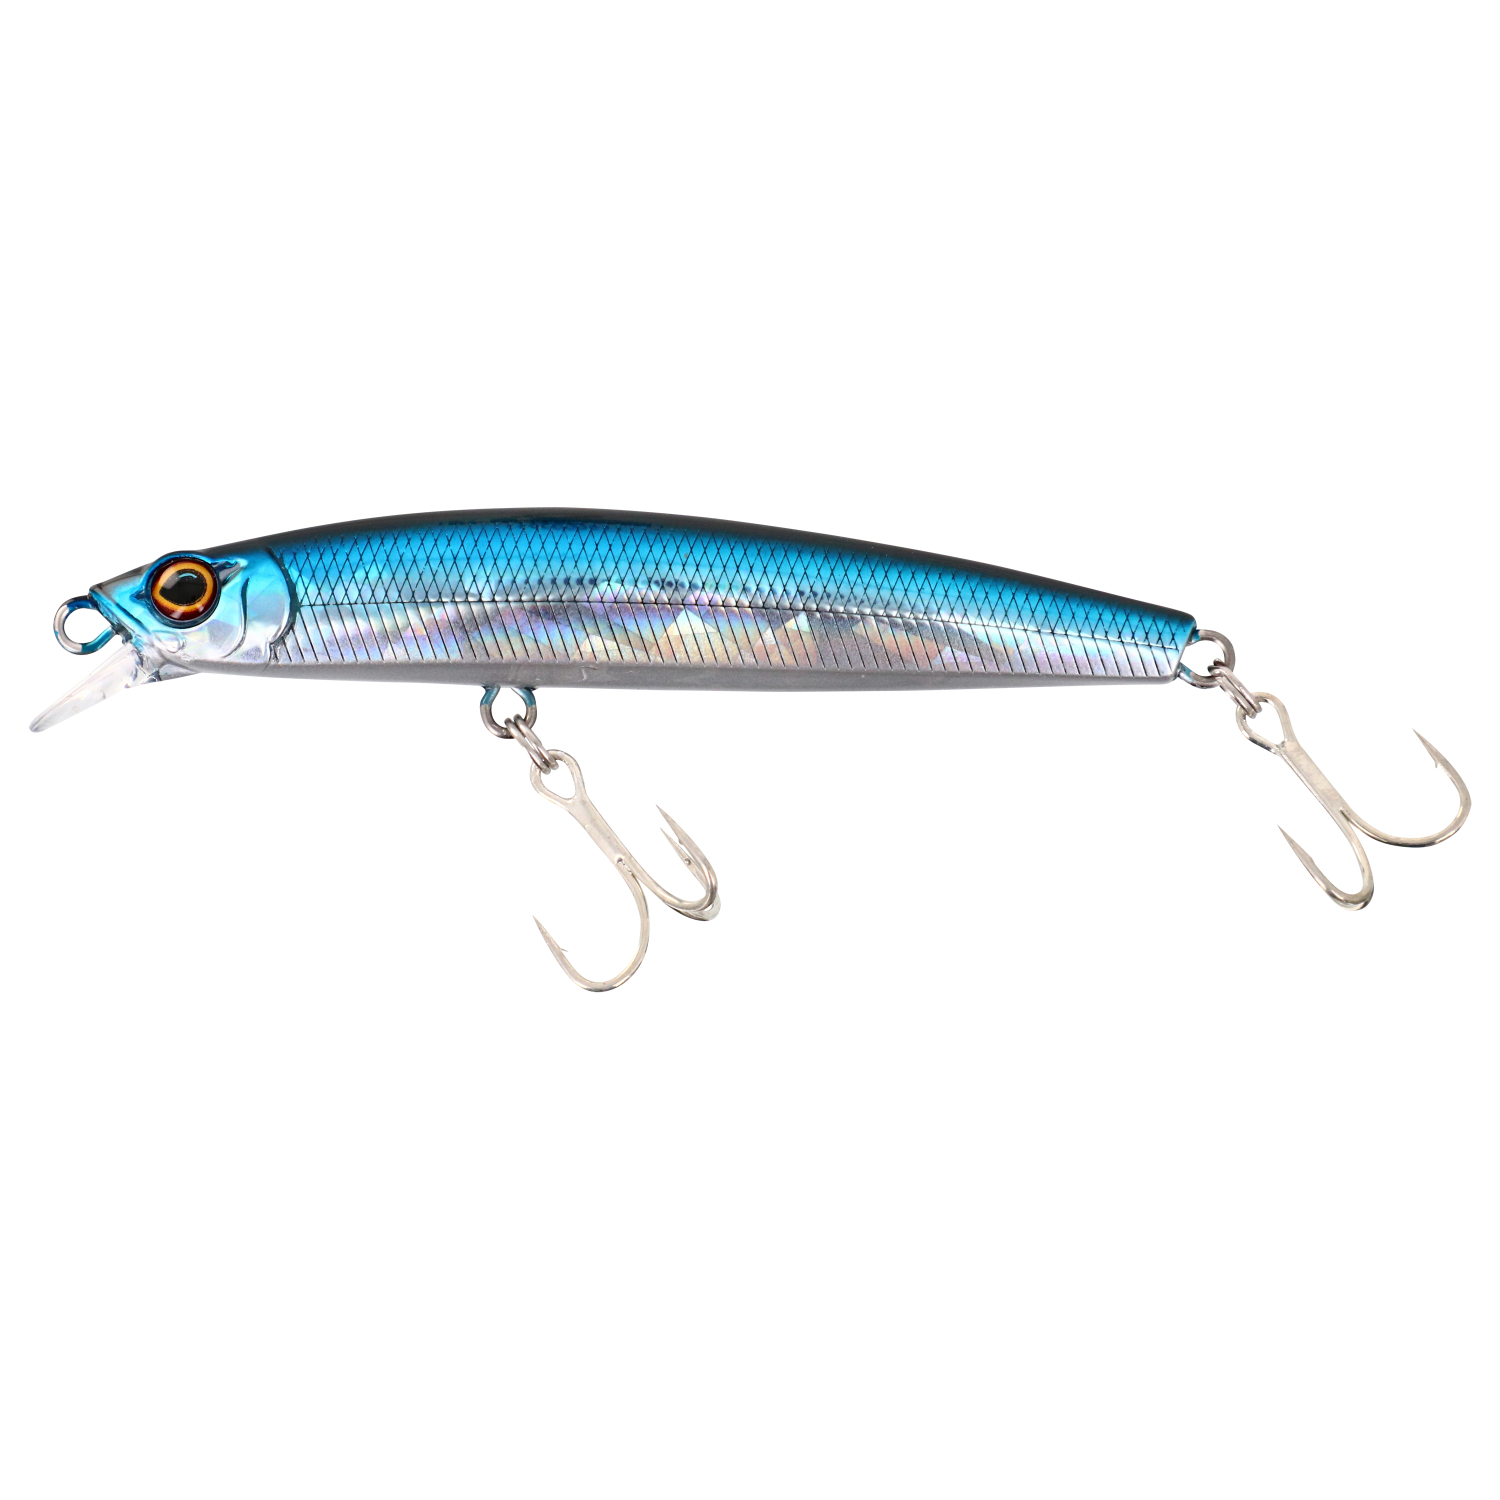 Hurricane Shad Fatal Attraction Fishing Lure/Hook 1- Ounce - Salt Water